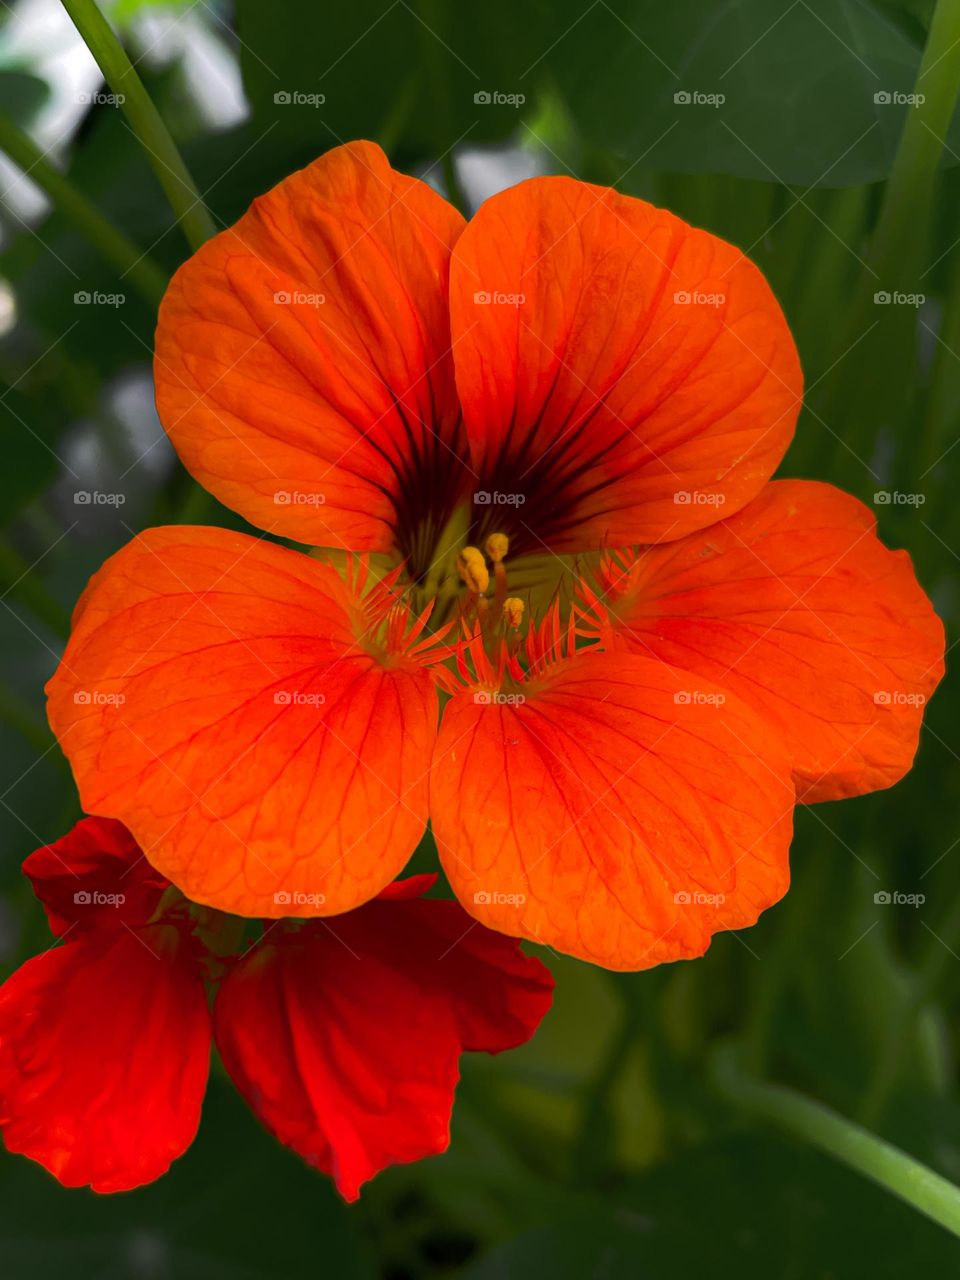 Orange flower plant zoomed closeup detailed phone photography photo image pic picture Mother Nature vibrant colors colorful pretty beautiful life living earthy hippie spring flowers no people bright outdoors contrast 